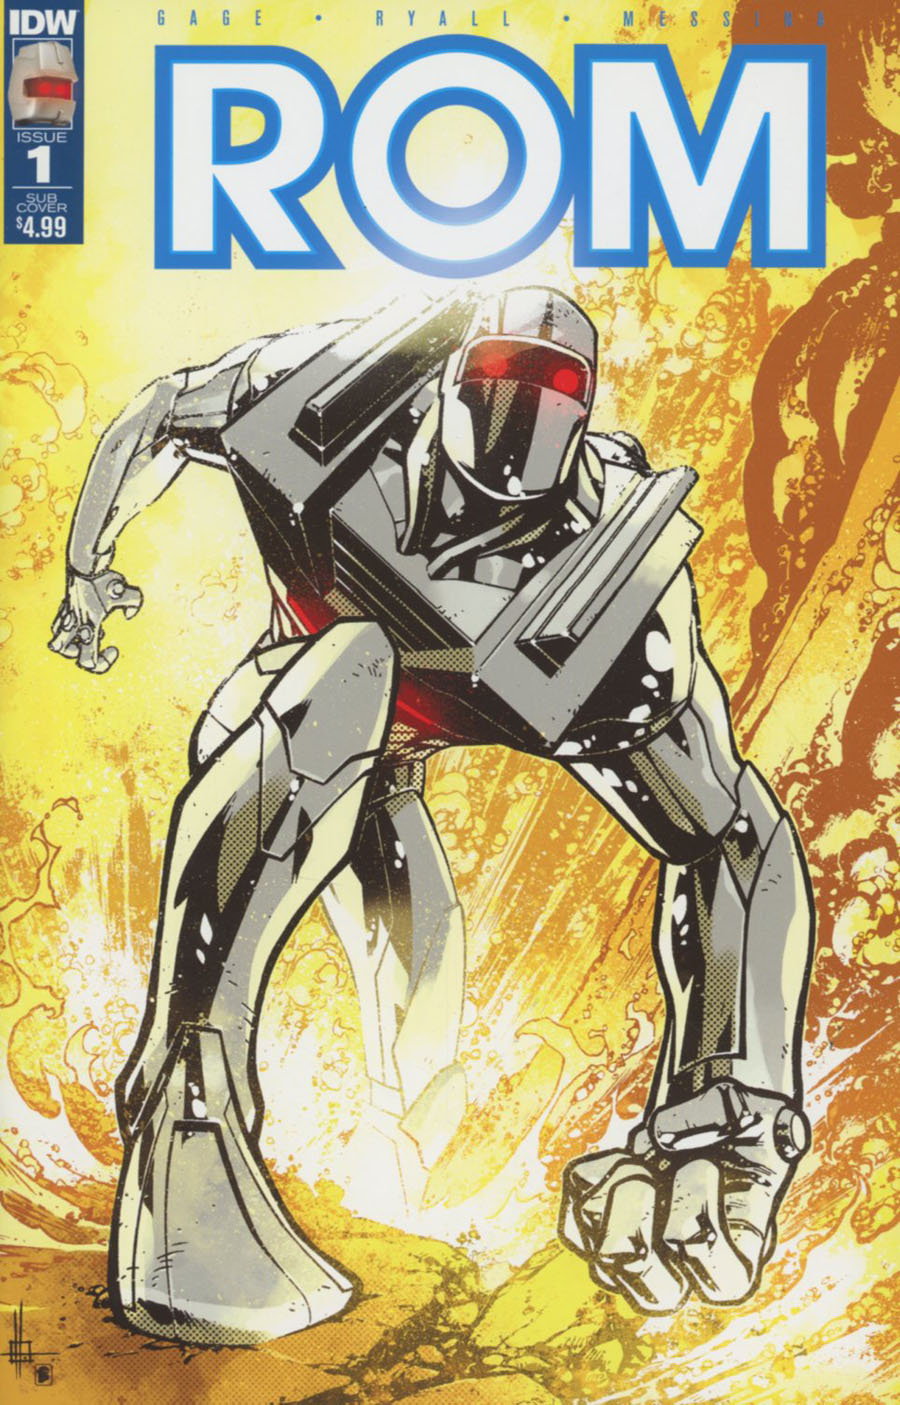 ROM Vol 2 #1 Cover B Variant Zach Howard Subscription Cover